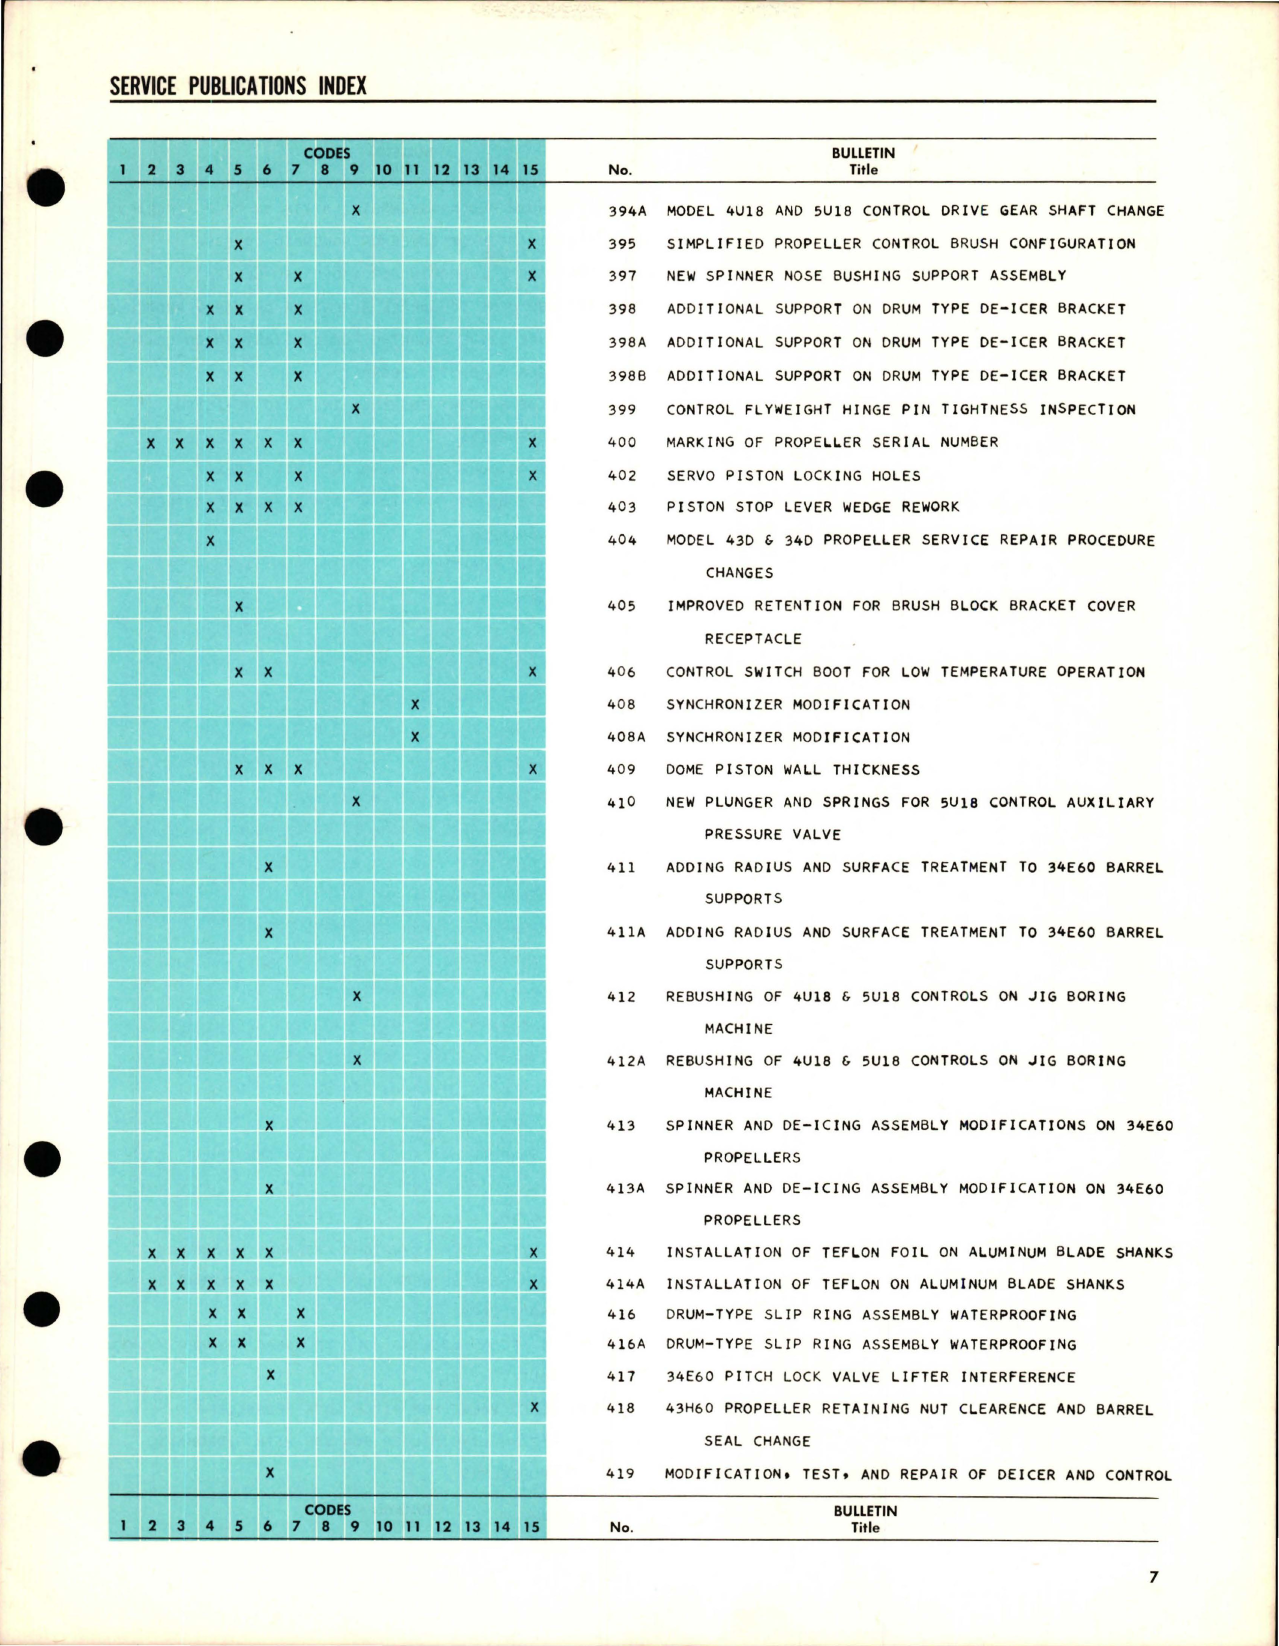 Sample page 7 from AirCorps Library document: Hamilton Standard Service Publications Index